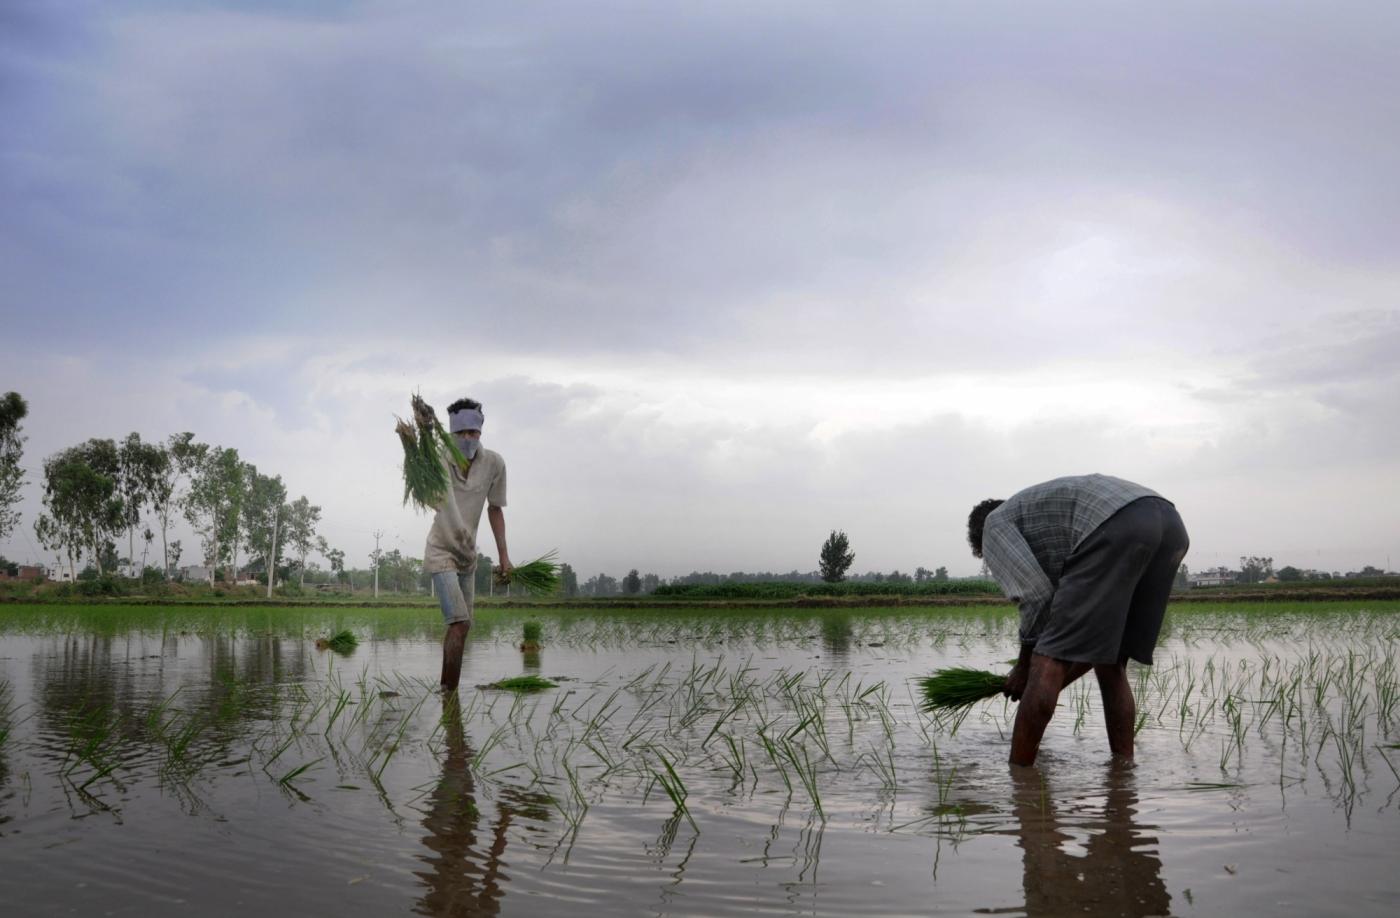 Amritsar: Farmers busy transplanting paddy saplings in a field on the outskirts of Amritsar on June 23, 2018. The total area sown under kharif crop as on June 22 stood at 115.9 lakh hectares as against 128.35 lakh hectares at this time last year. According to Agriculture Ministry rice has been sown in 10.67 lakh hectares, pulses in 5.91 lakh hectares, coarse cereals in 16.69 lakh hectares, sugarcane in 50.01 lakh hectares, oil seeds in 5.03 lakh hectares, jute and mesta in 6.91 lakh hectares and cotton in 20.68 lakh hectares. (Photo: IANS) by .